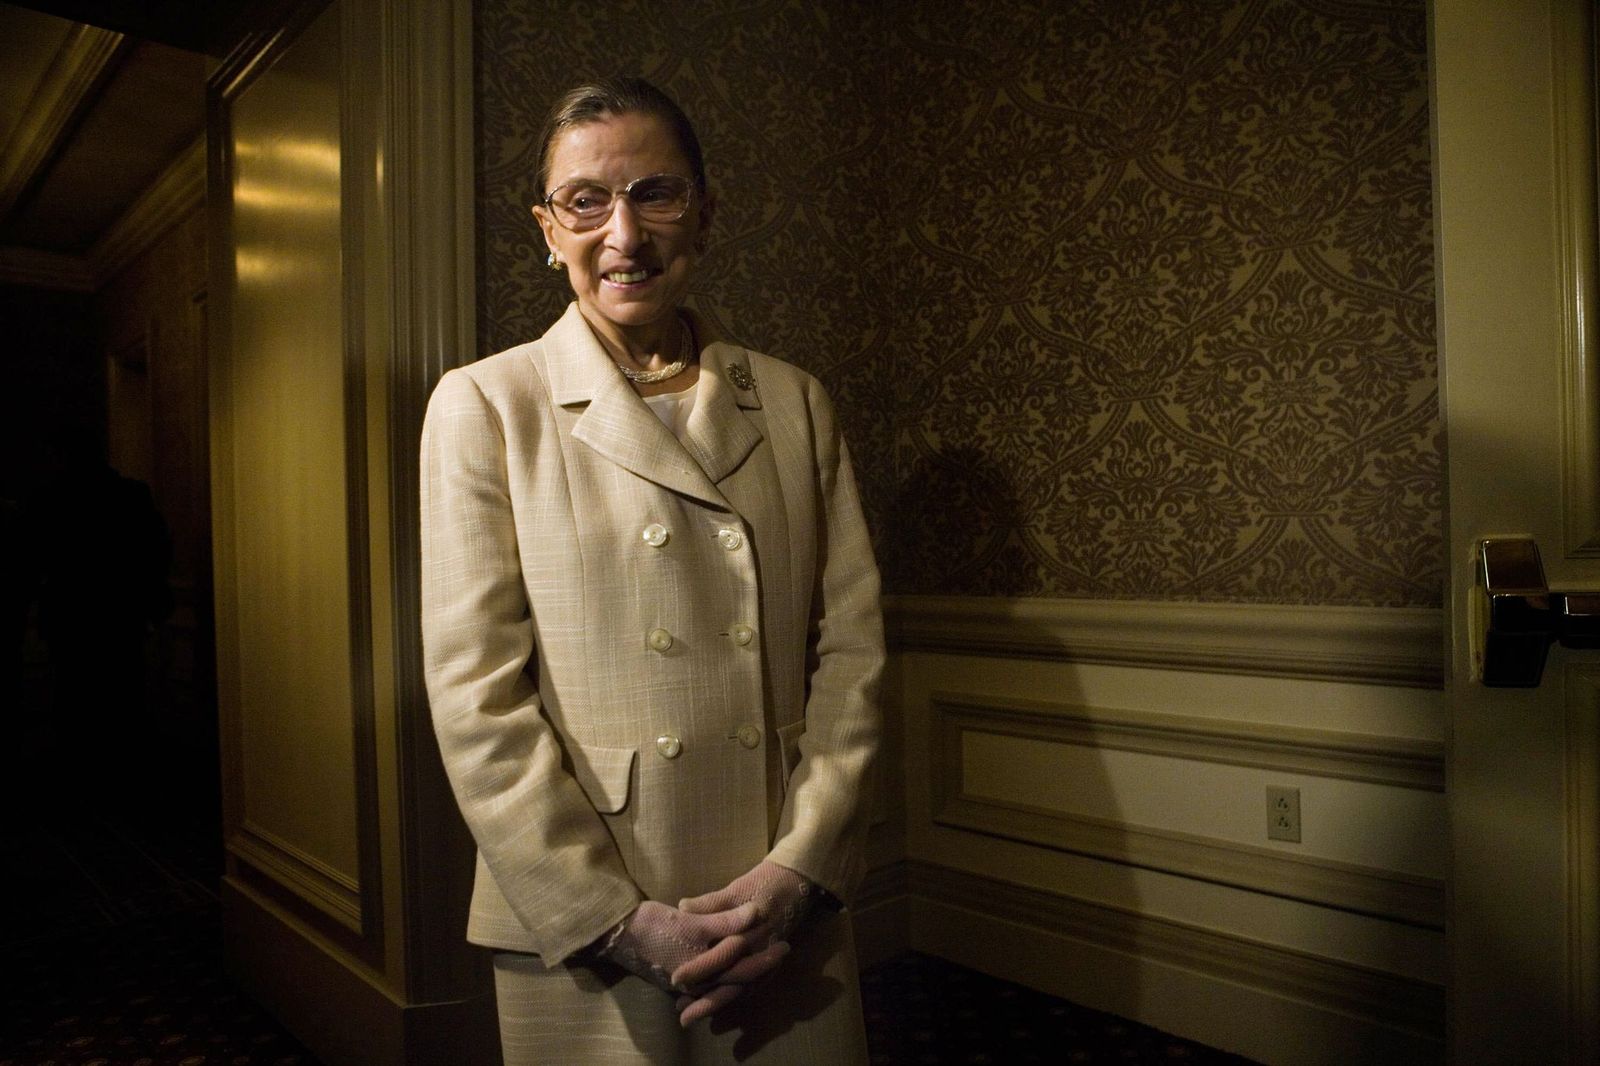 US Supreme Court Justice Ruth Bader Ginsburg on May 8, 2006, in Washington, D.C. | Photo: Getty Images